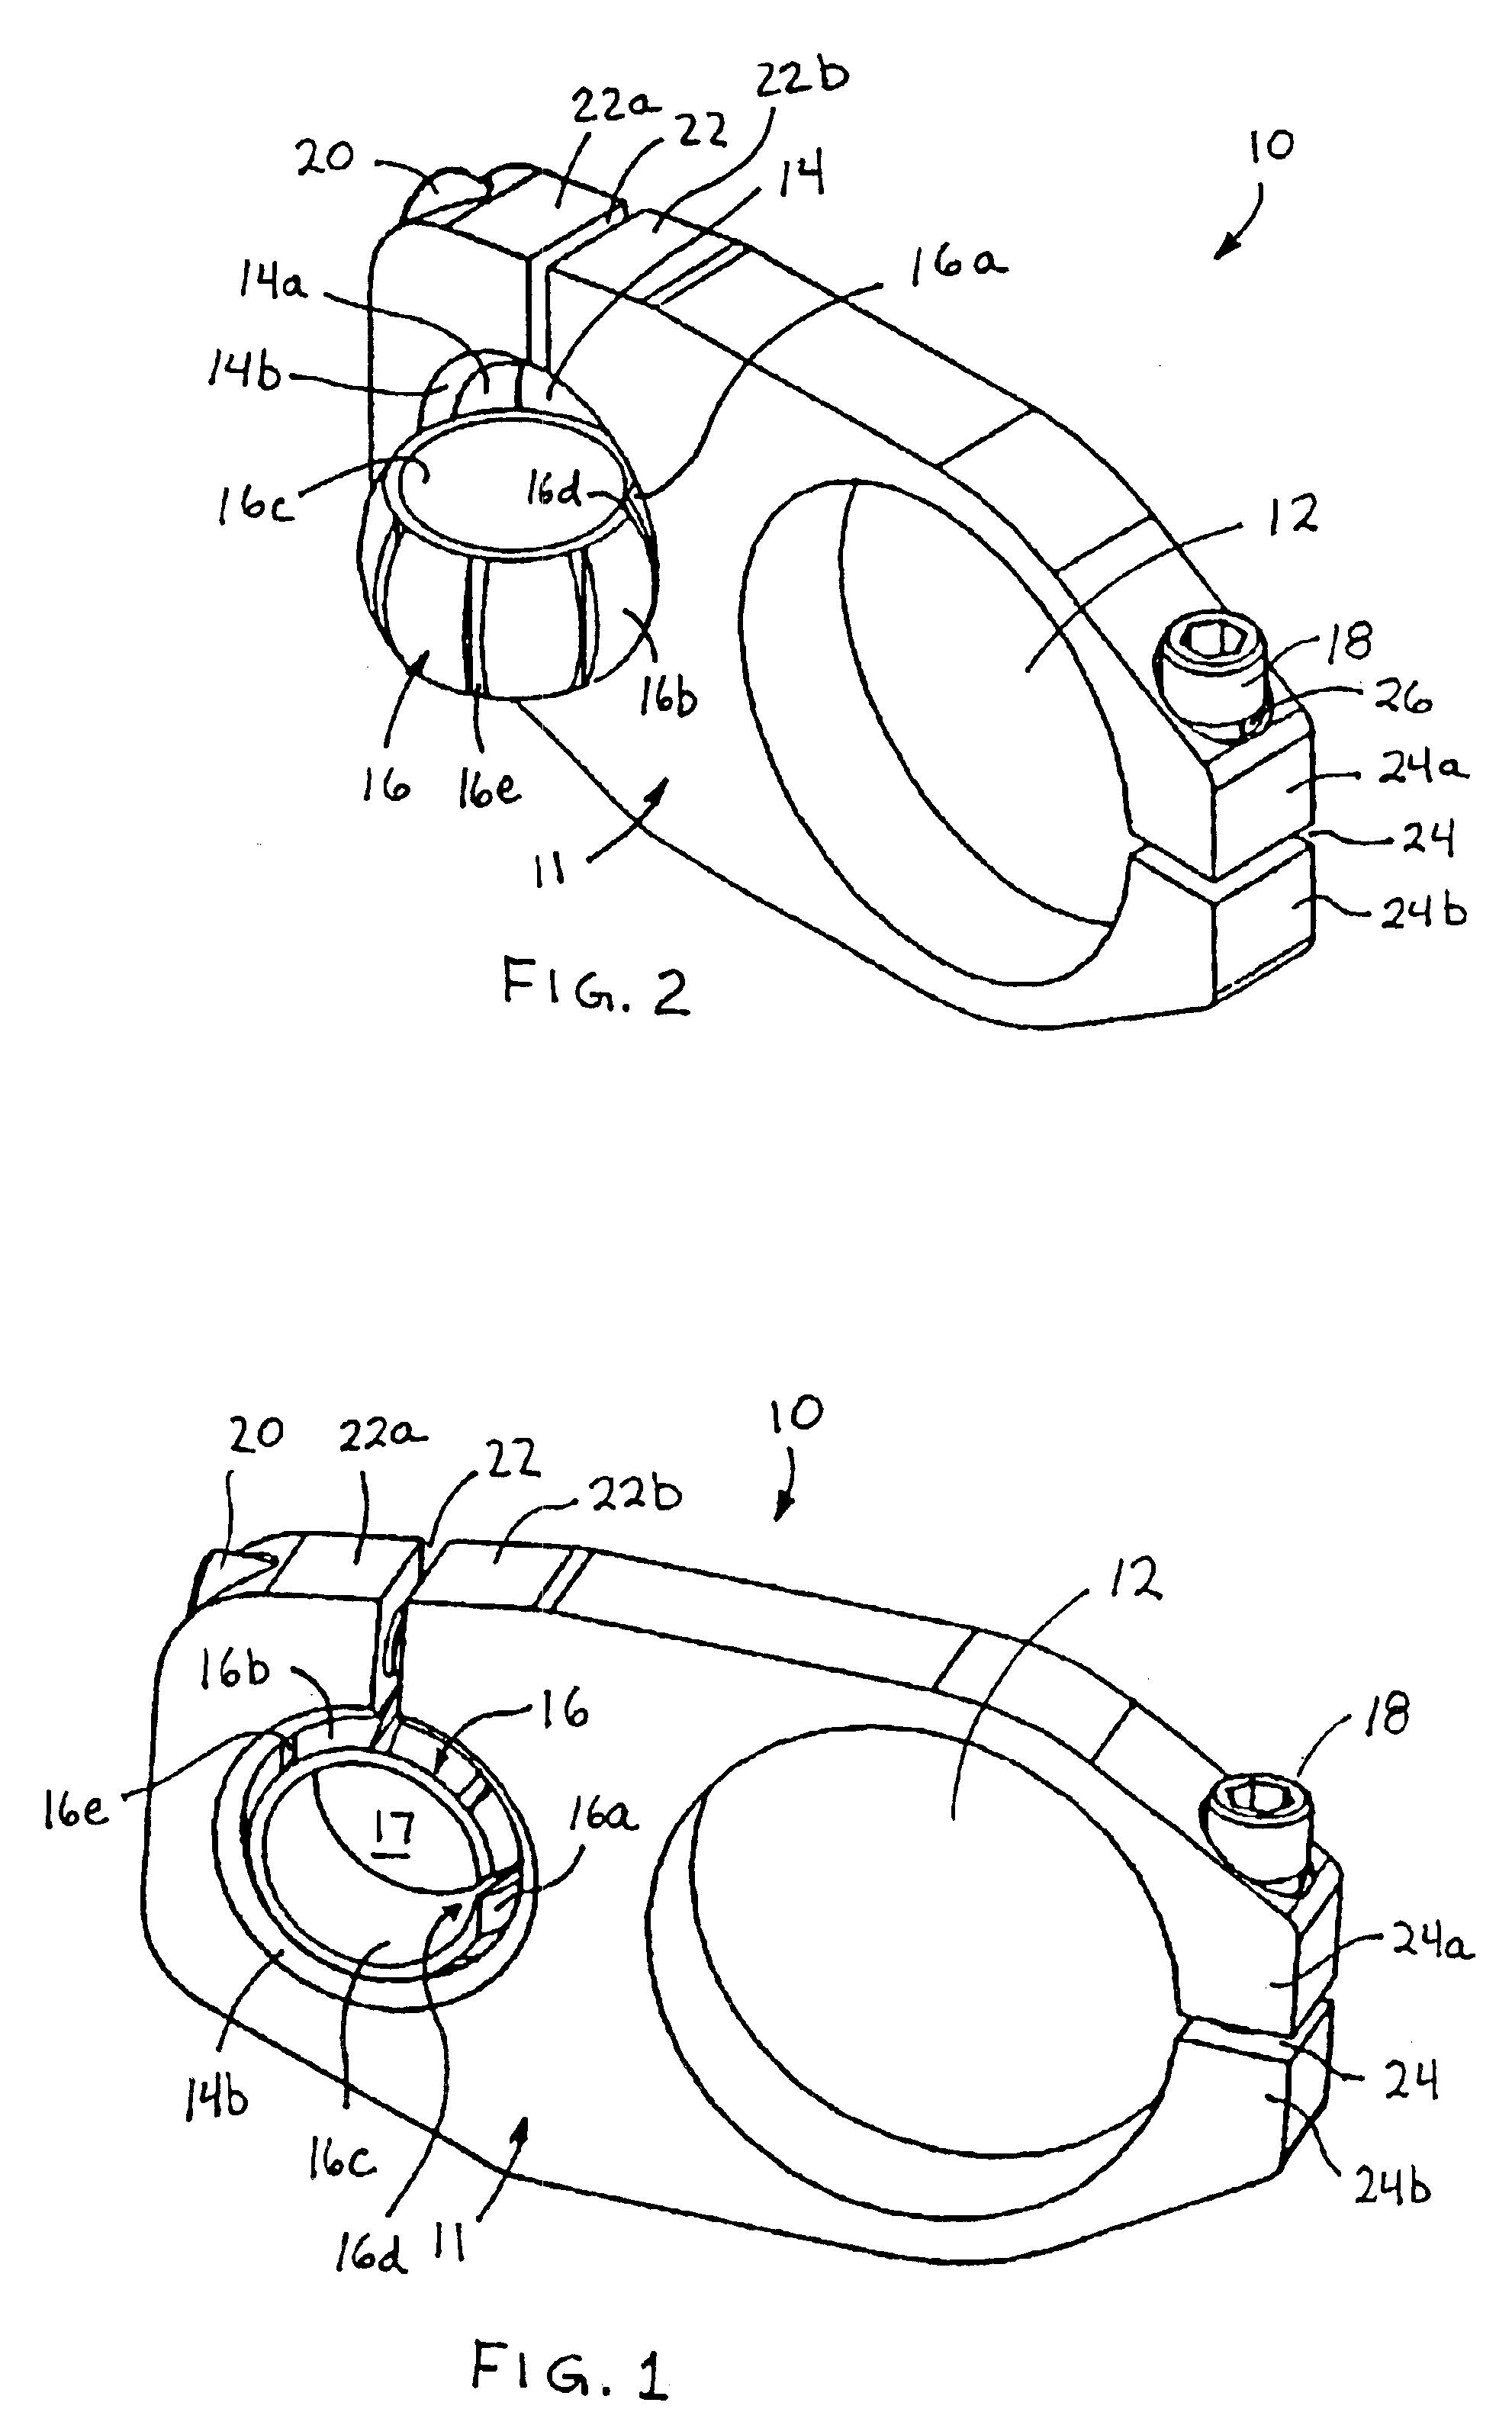 Mounting member with snap in swivel member